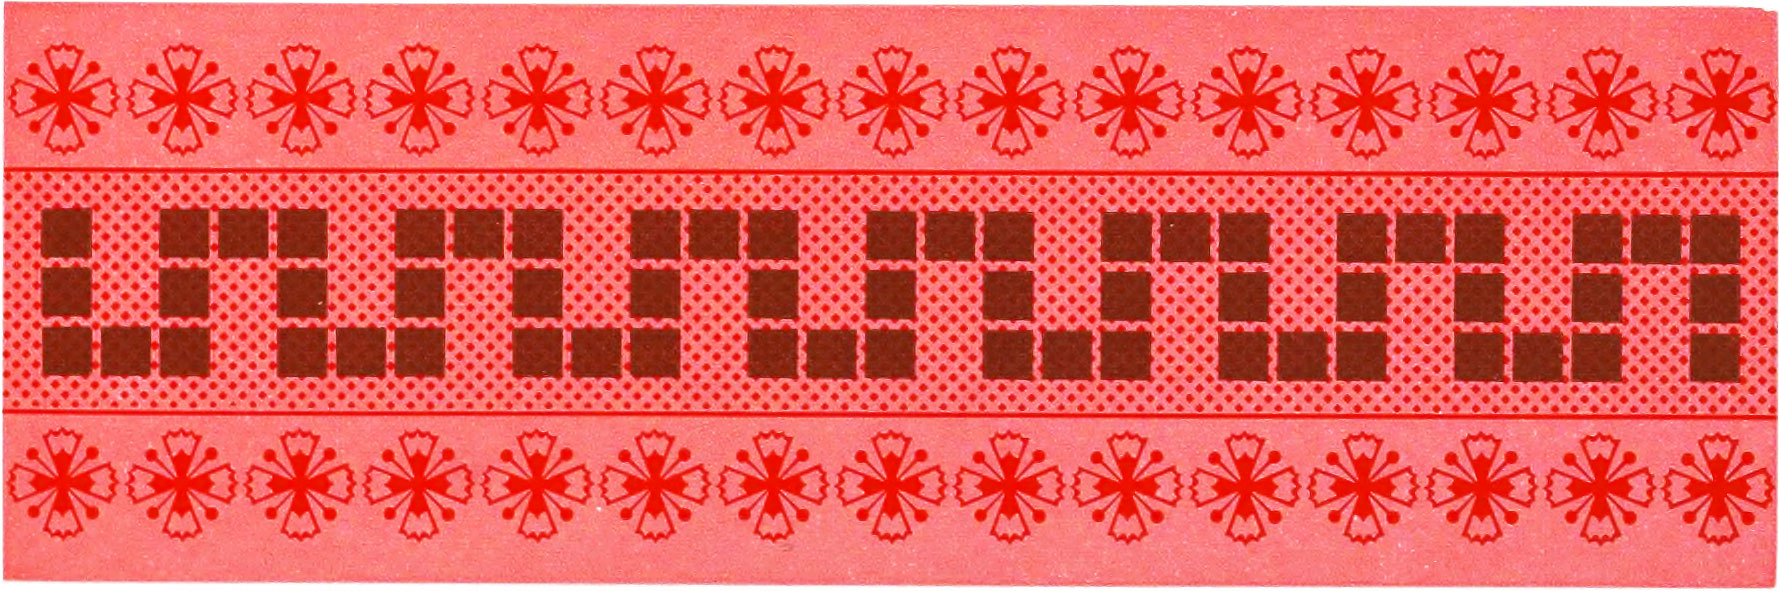 Ornate border comprising shades of red